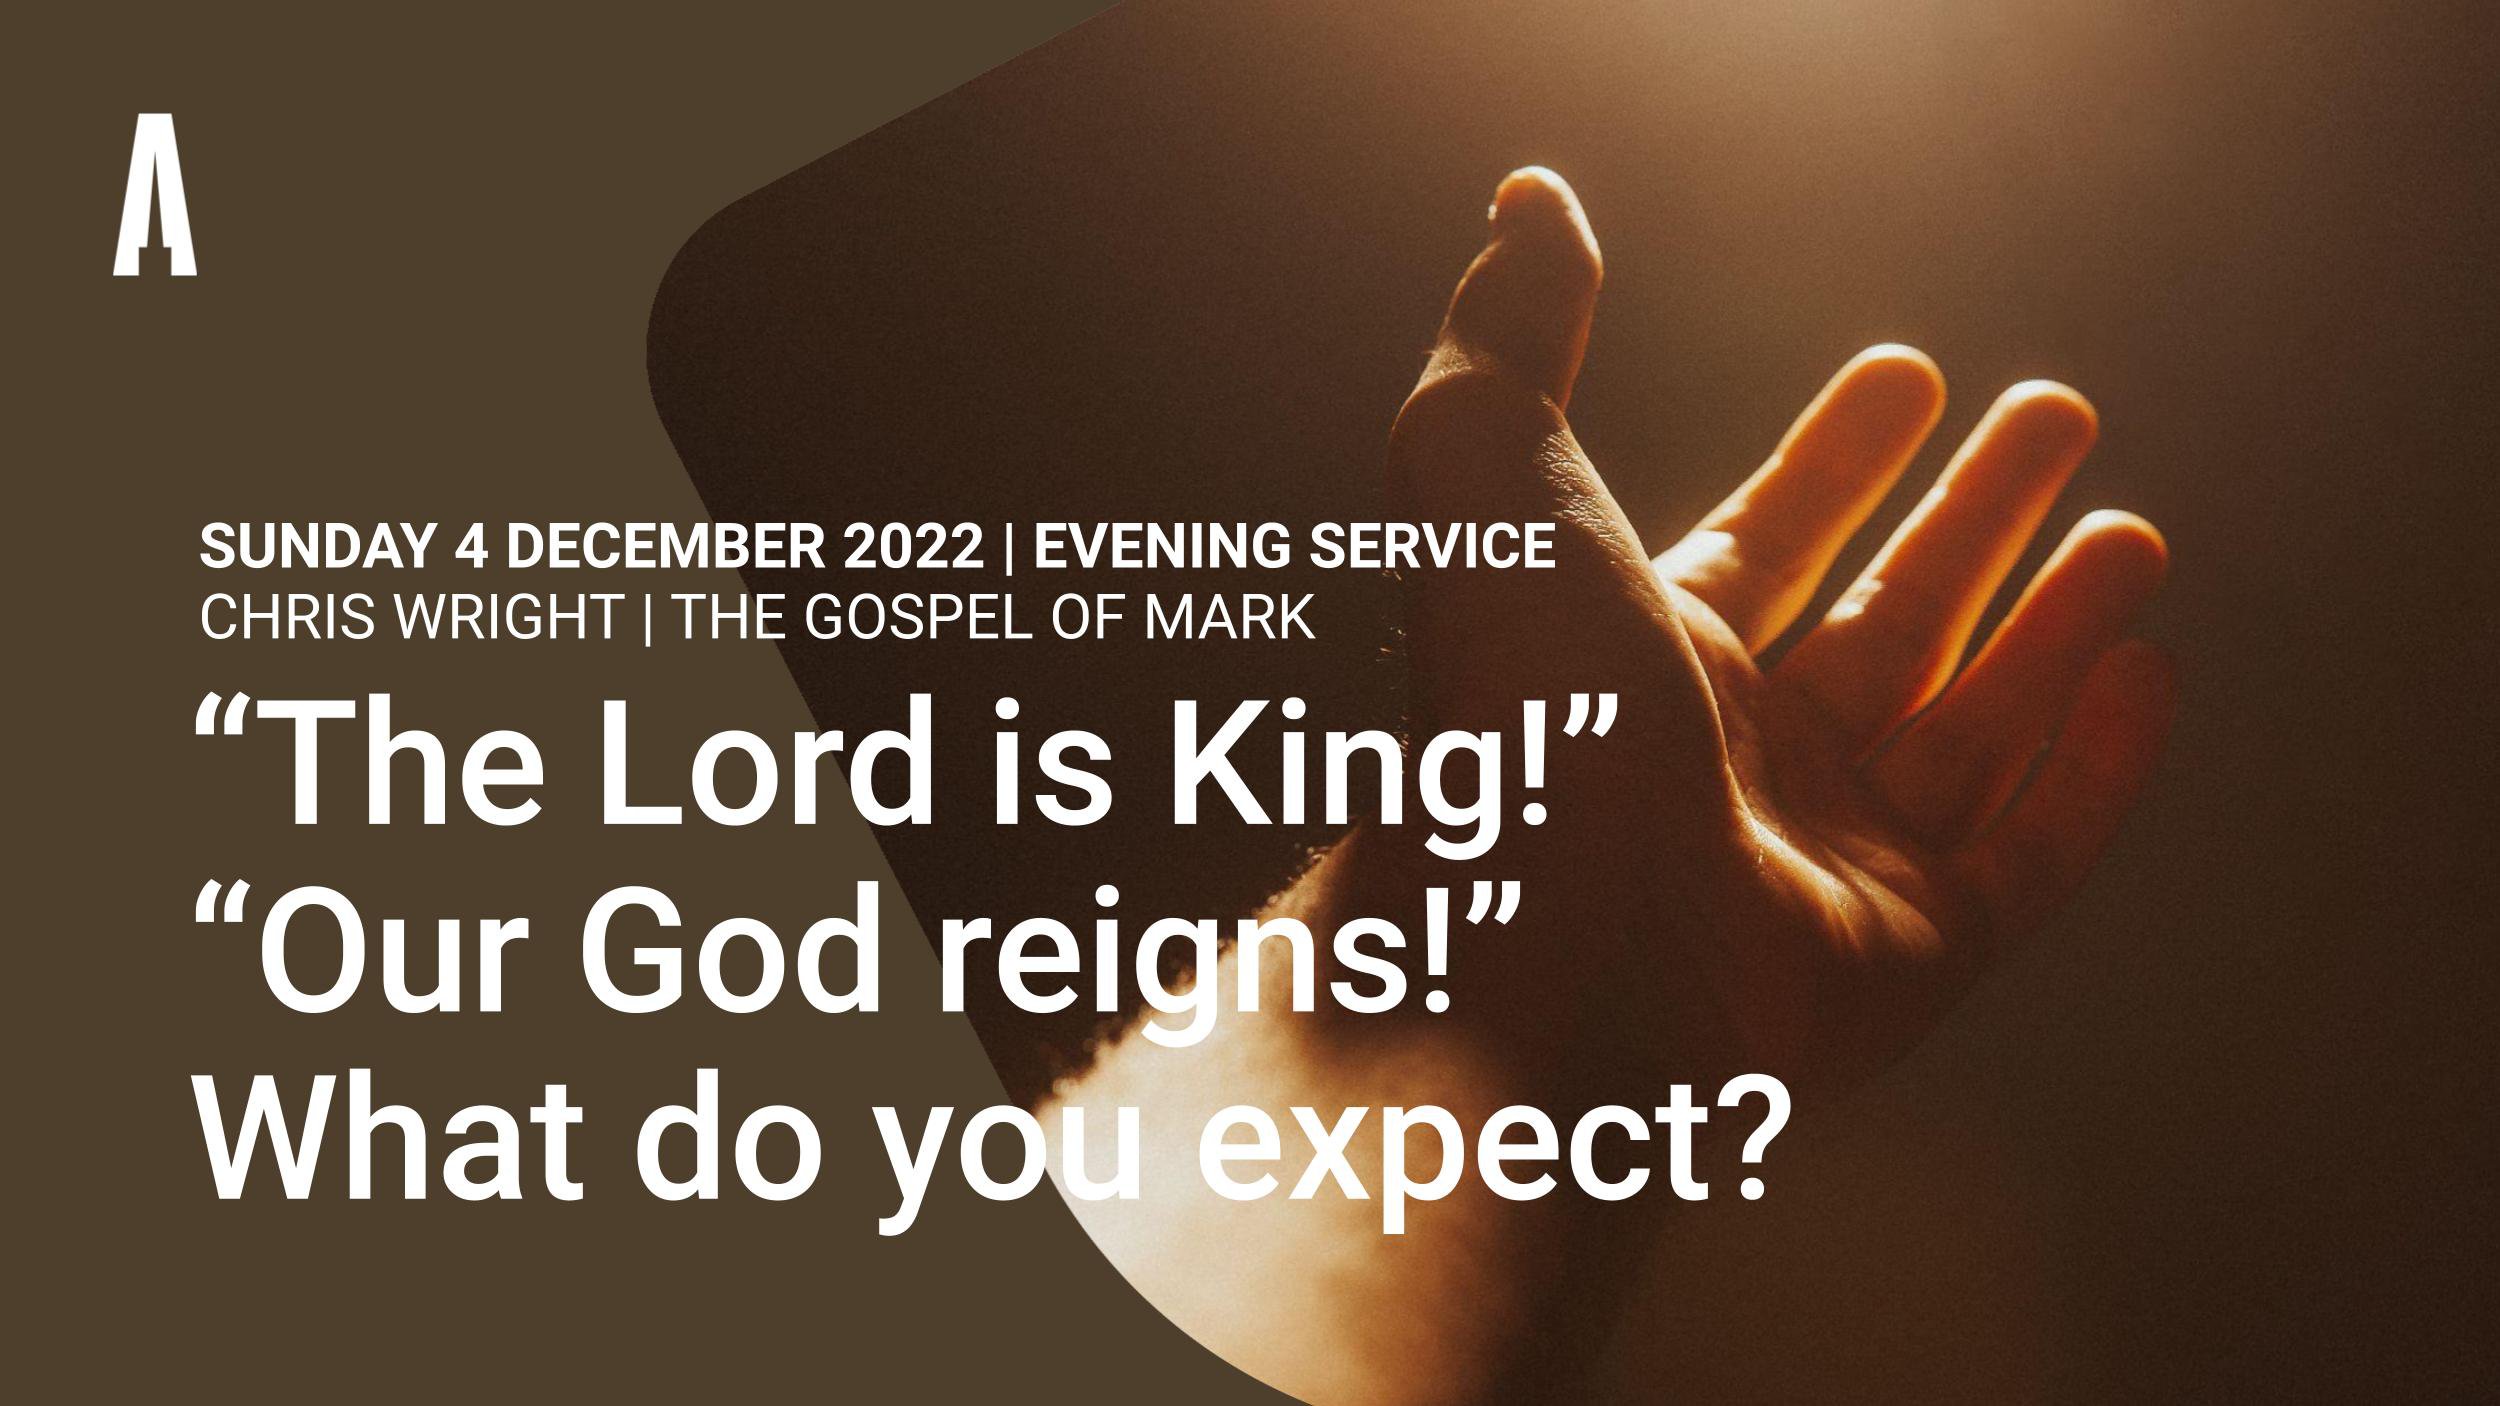 “The Lord is King!” “Our God reigns!” What do you expect?